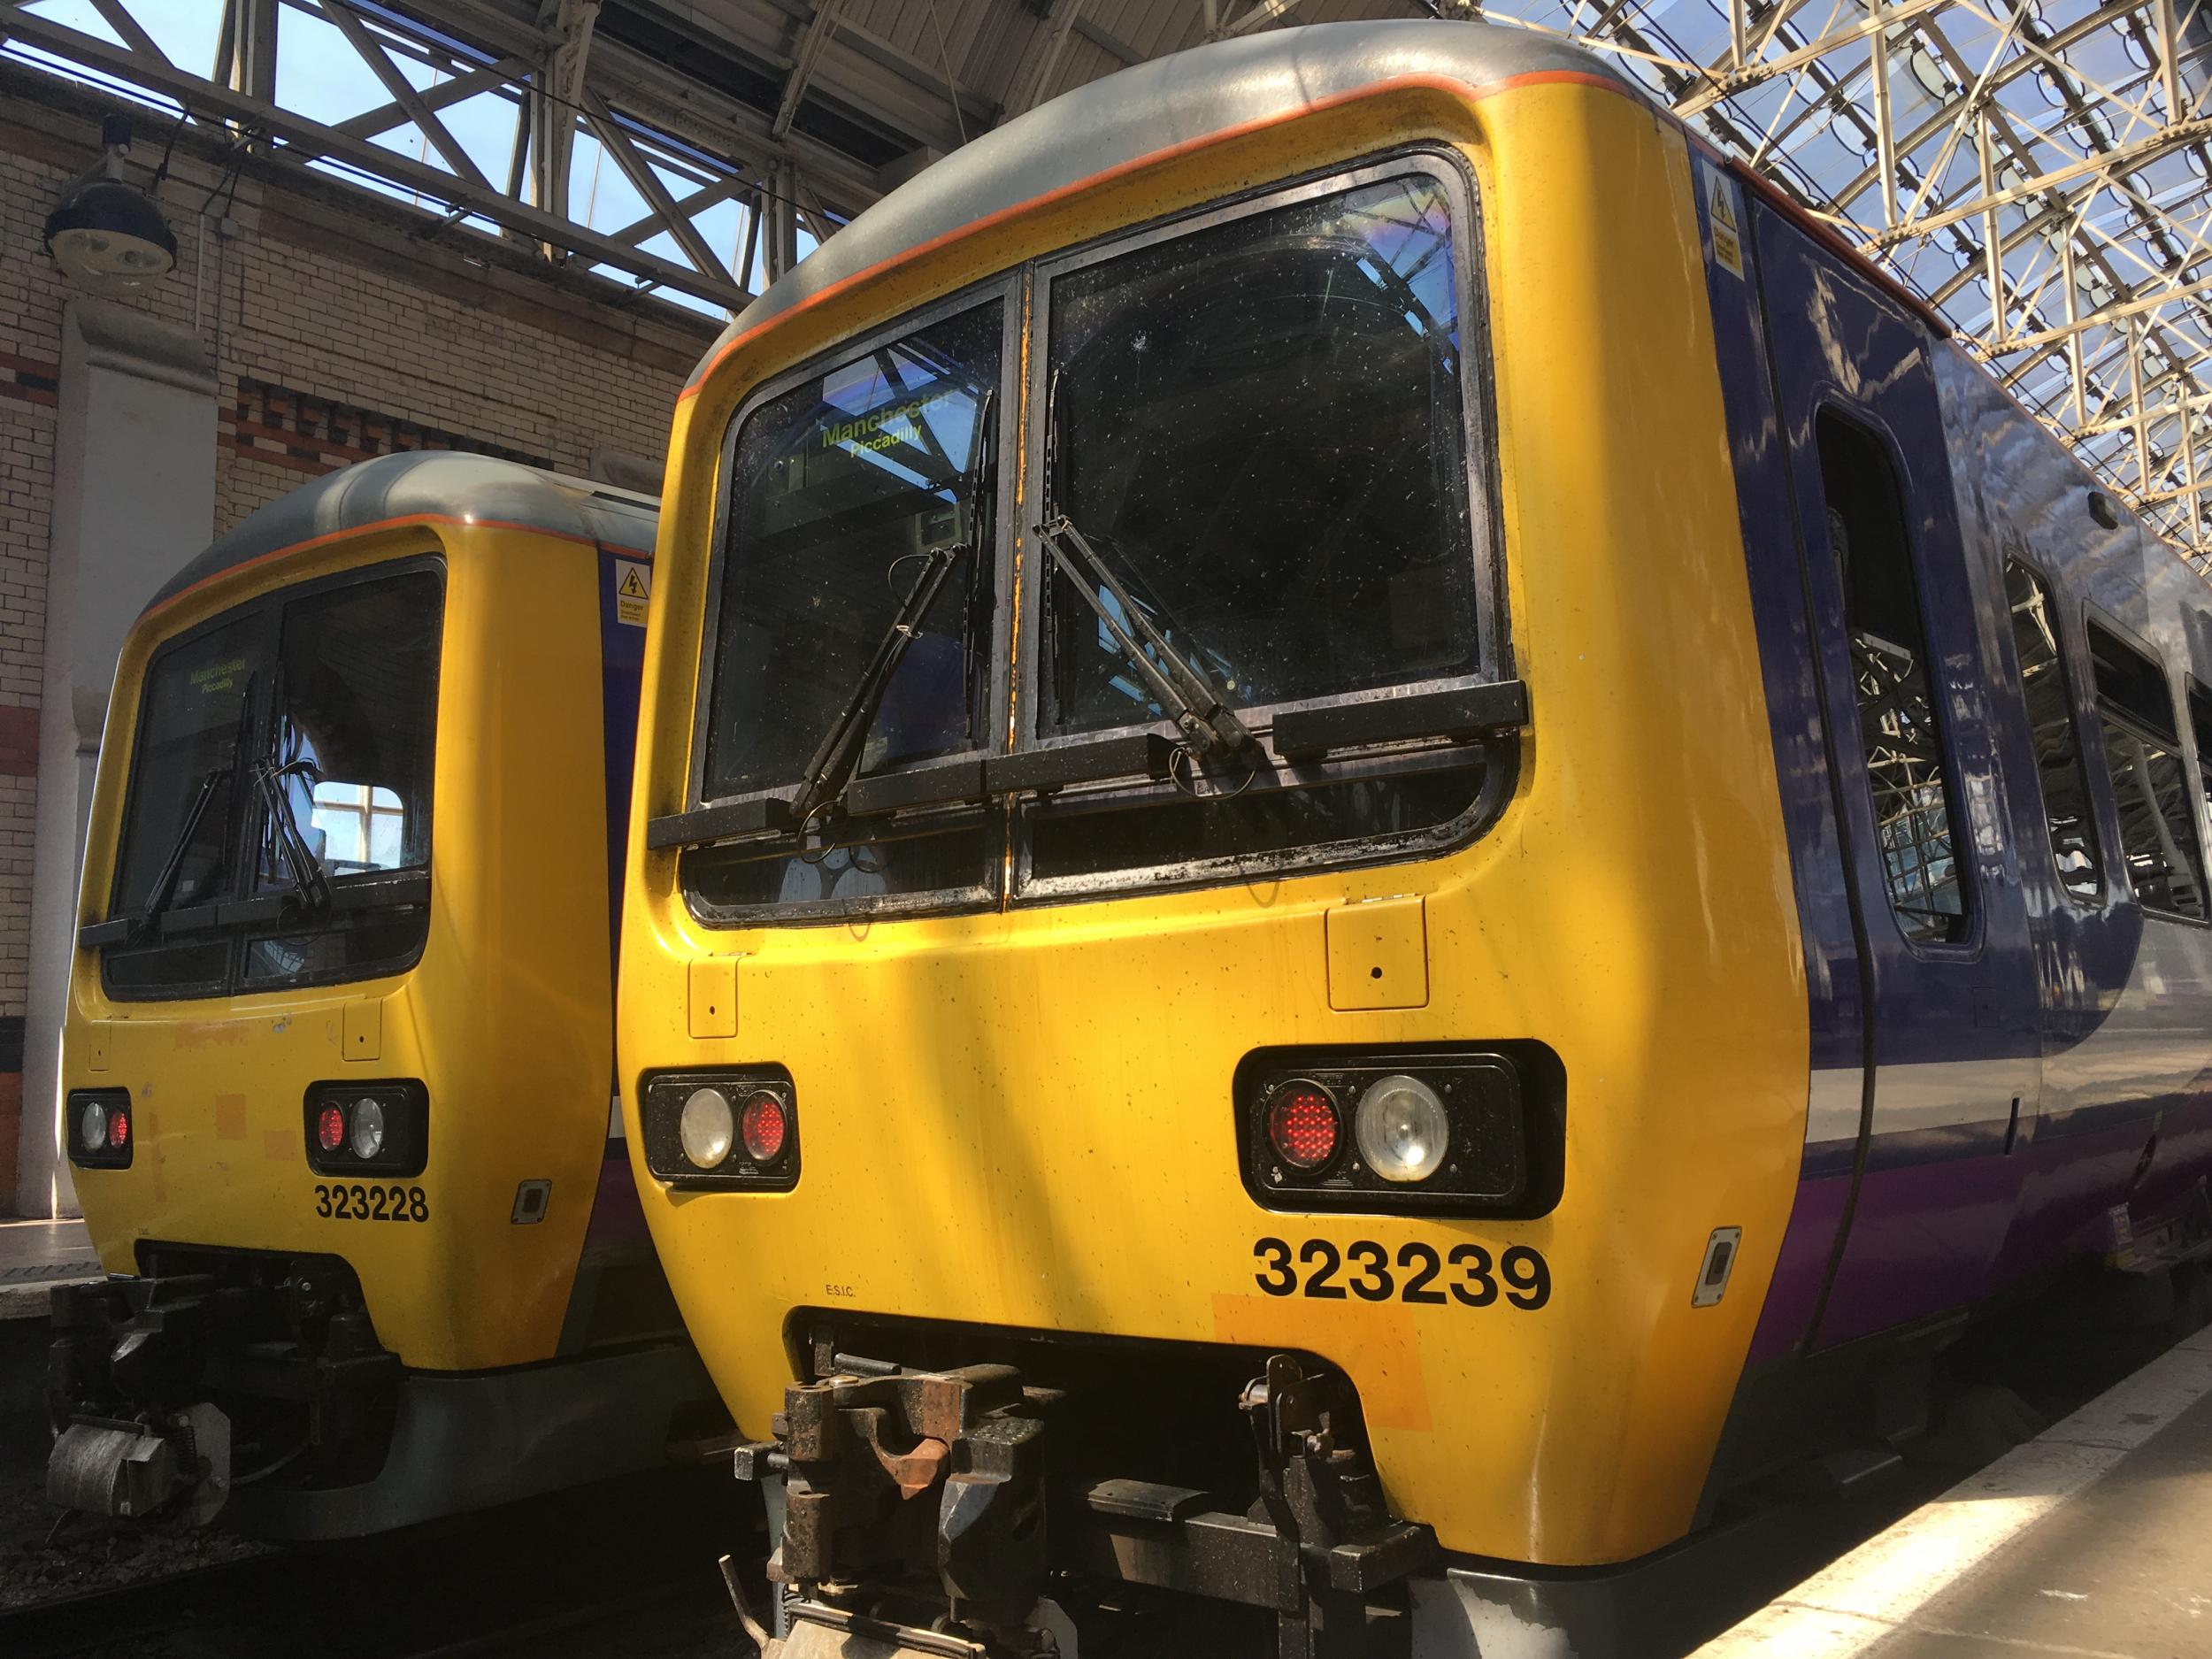 Northern’s performance is the end result of a botched privatisation programme